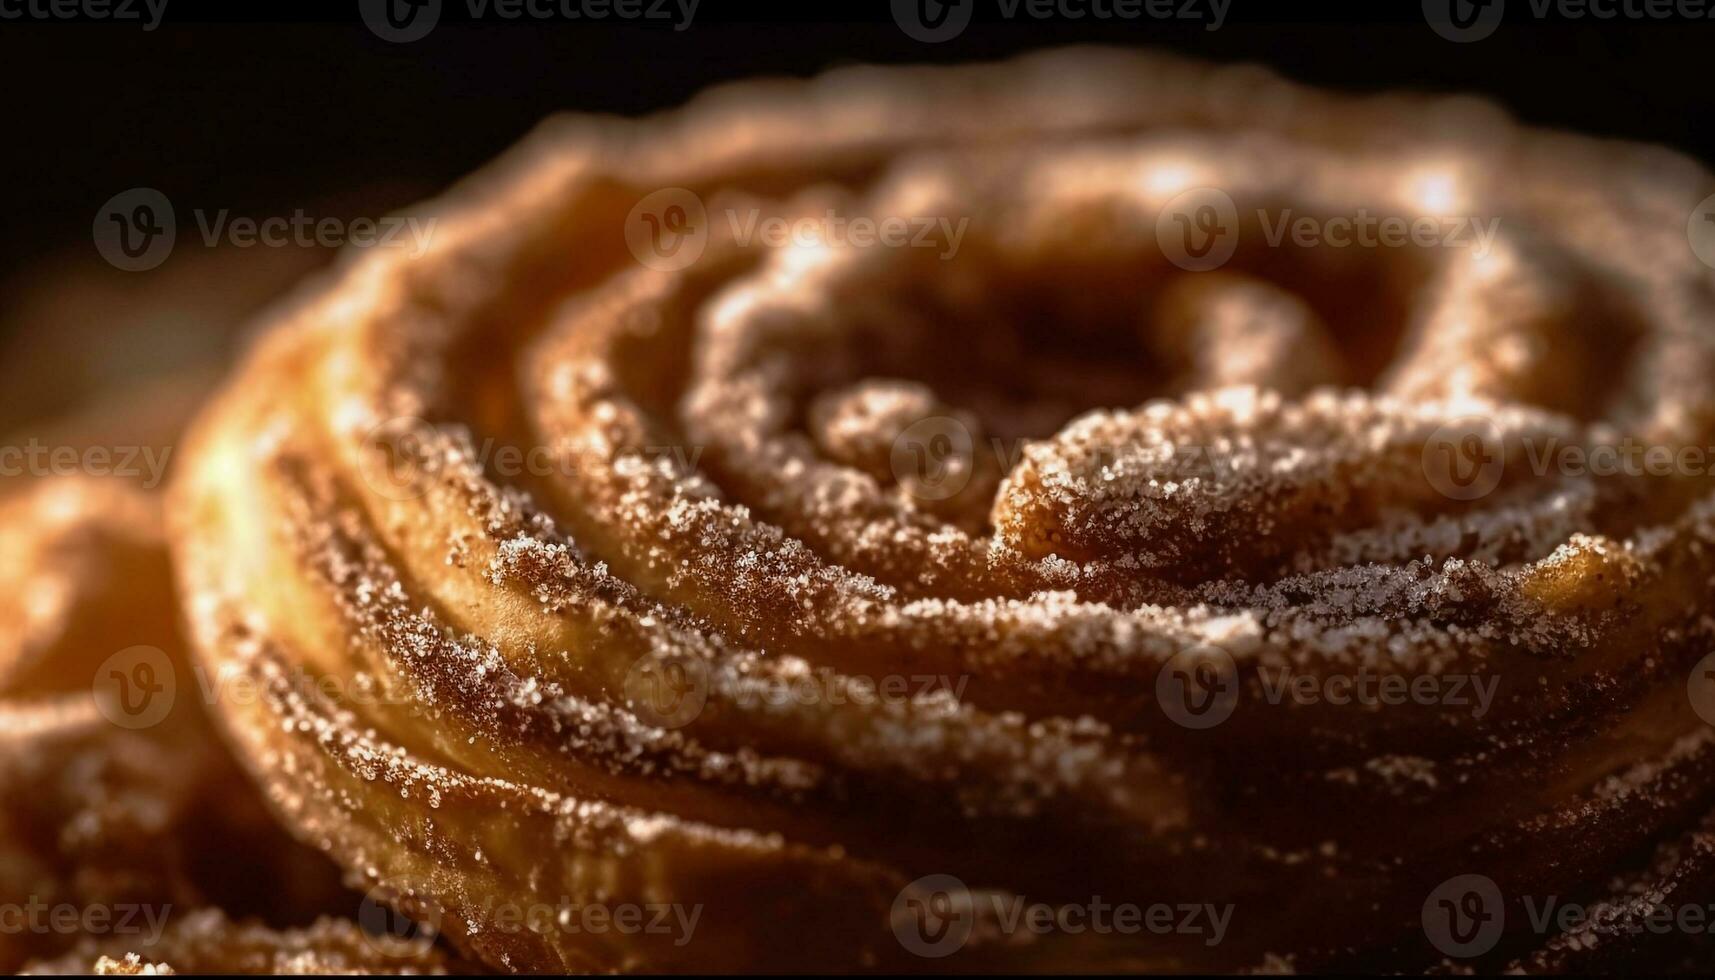 Freshly baked caramel apple pastry, a gourmet indulgence generated by AI photo